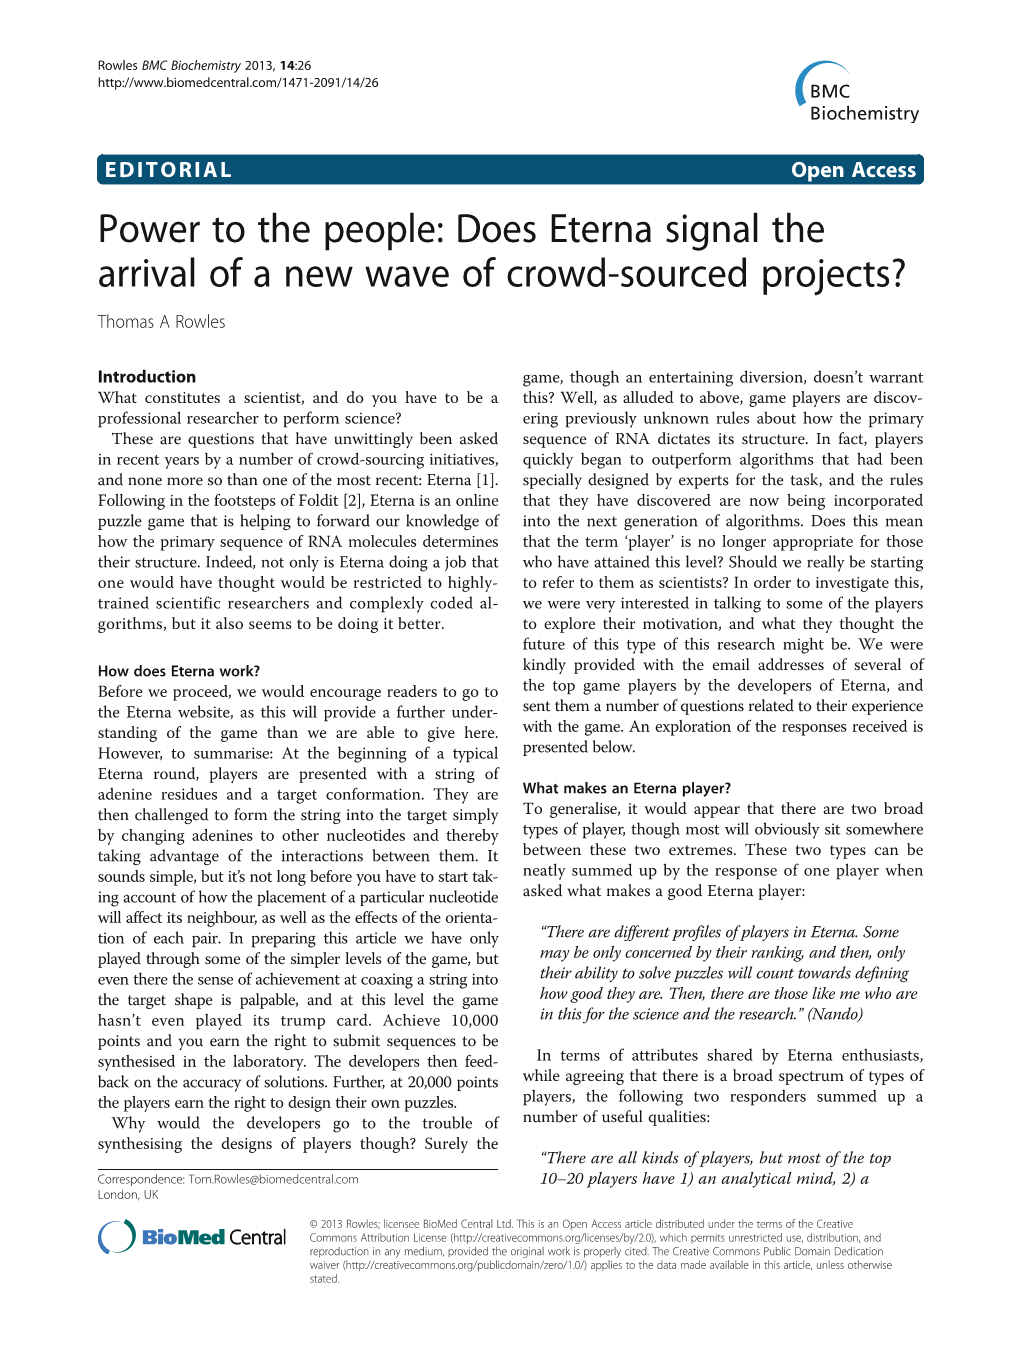 Does Eterna Signal the Arrival of a New Wave of Crowd-Sourced Projects? Thomas a Rowles